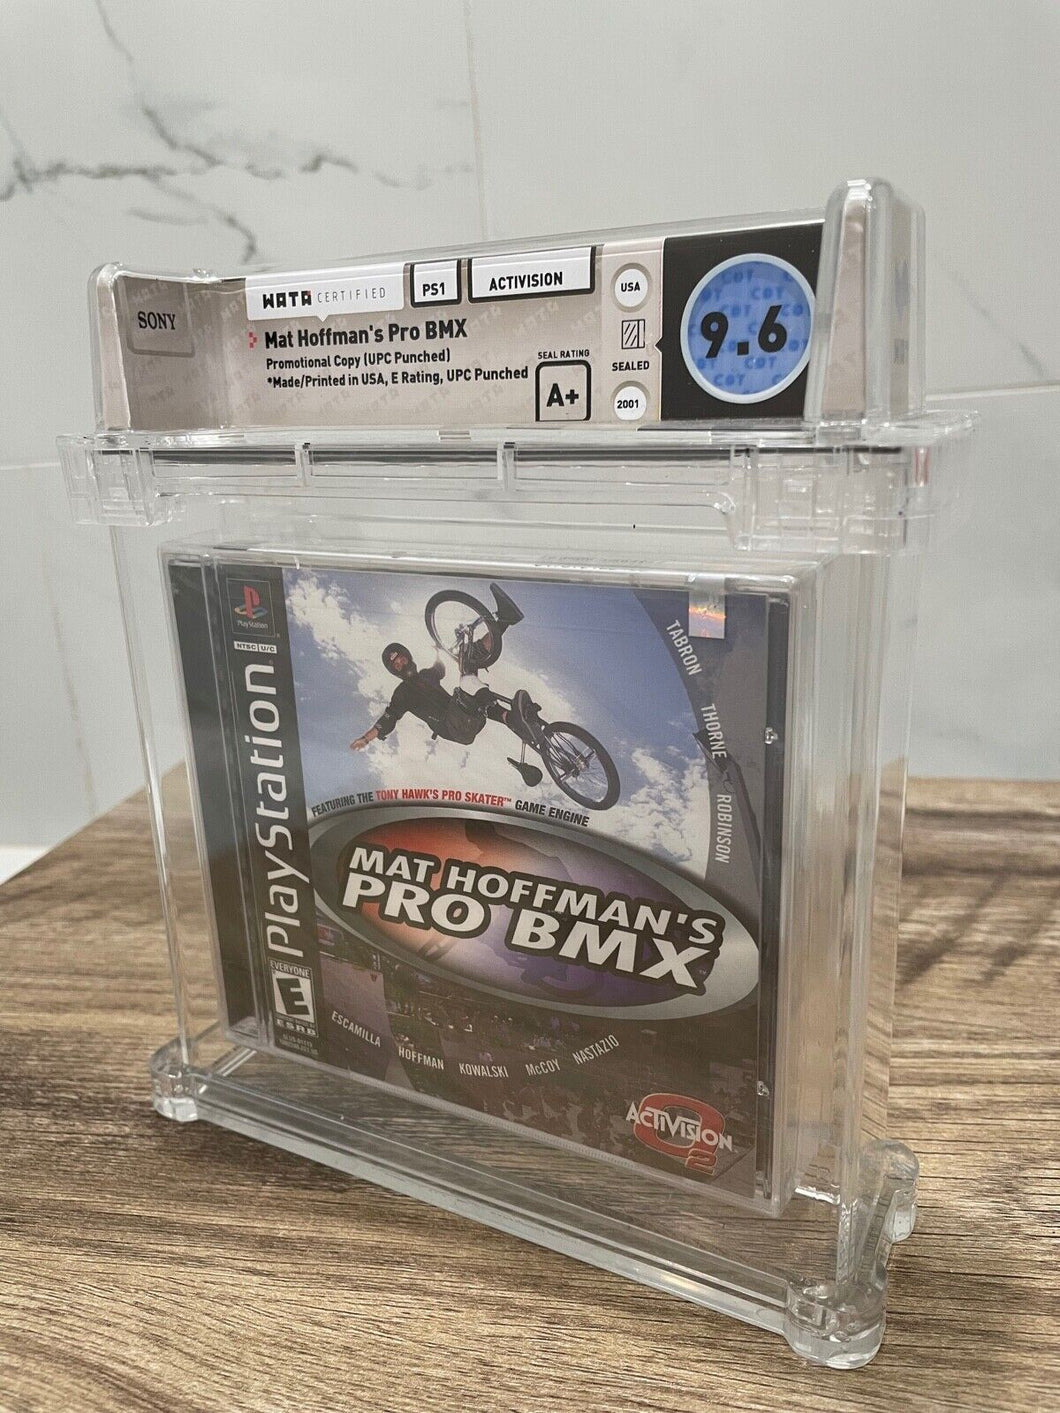 Mat Hoffman's Pro BMX Sony Playstation Factory Sealed Video Game Wata 9.6 Graded